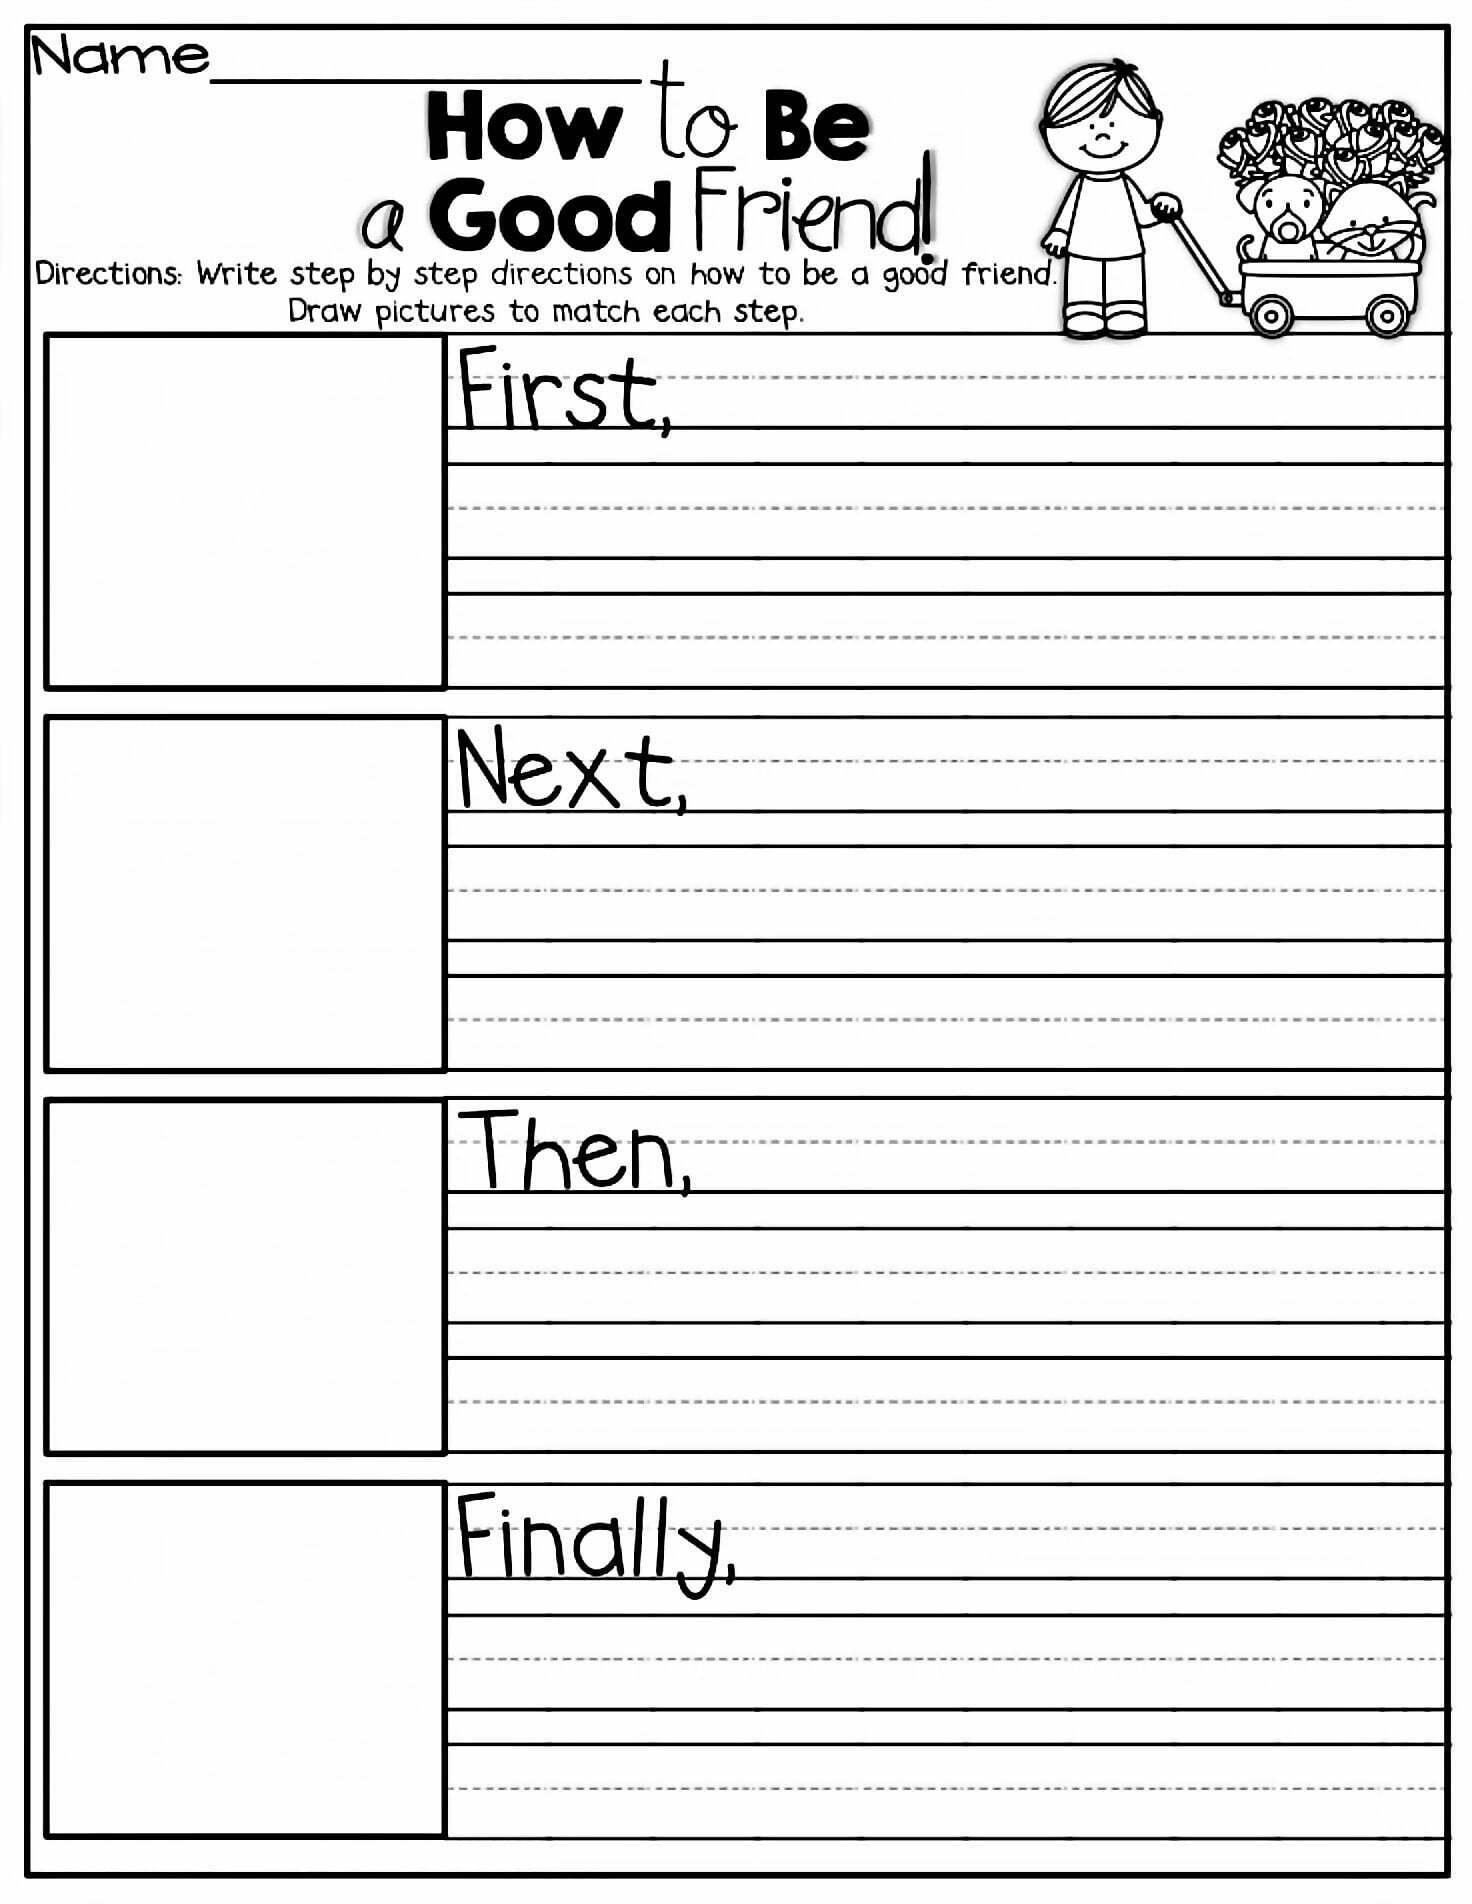 Good Examples Of 1st Grade Worksheets Free Download